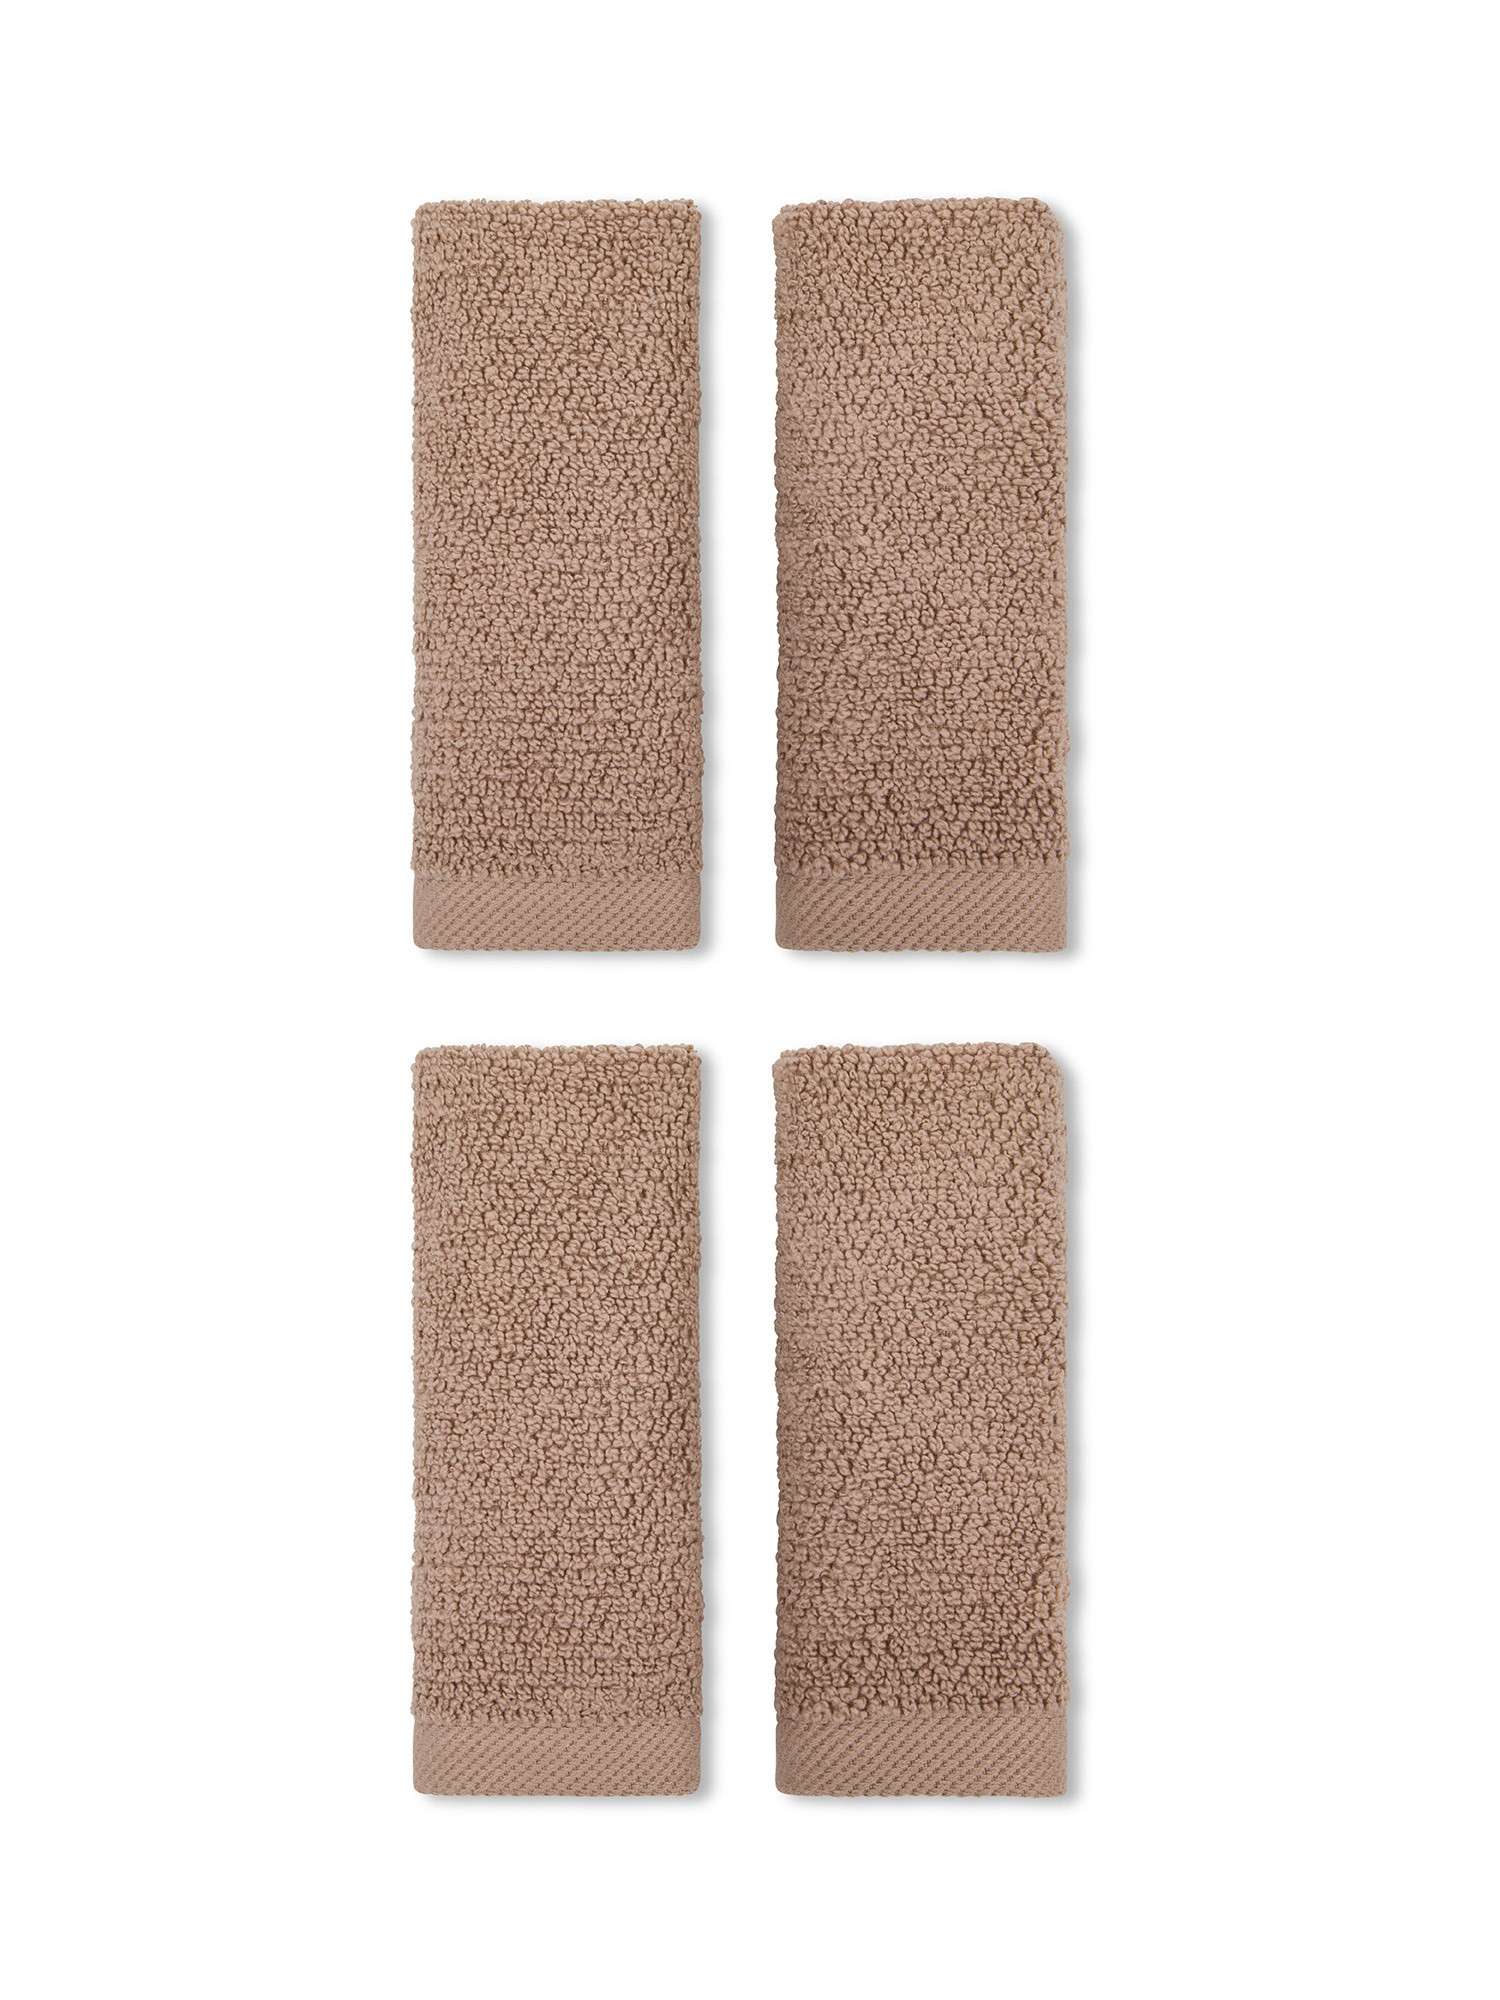 Cotton terry washcloth set of 4, TAUPE, large image number 0